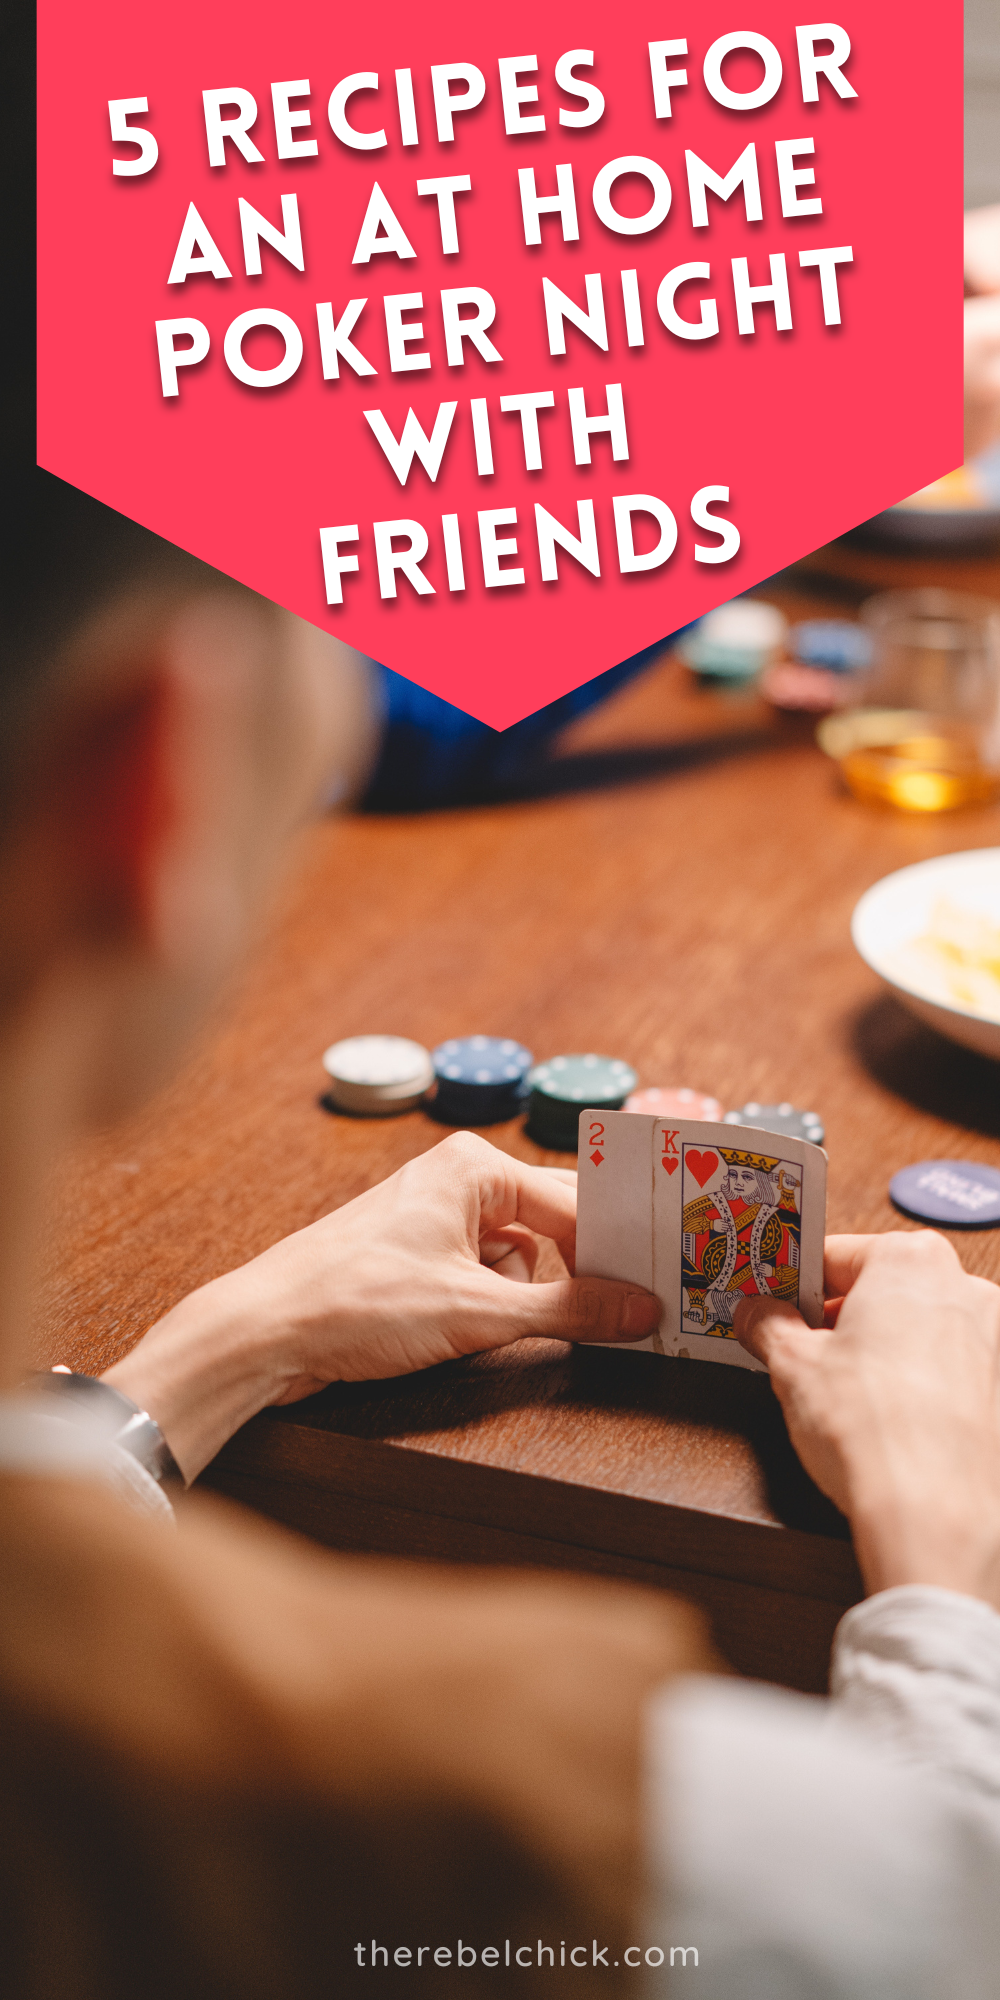 5 Recipes for an at home poker night with friends